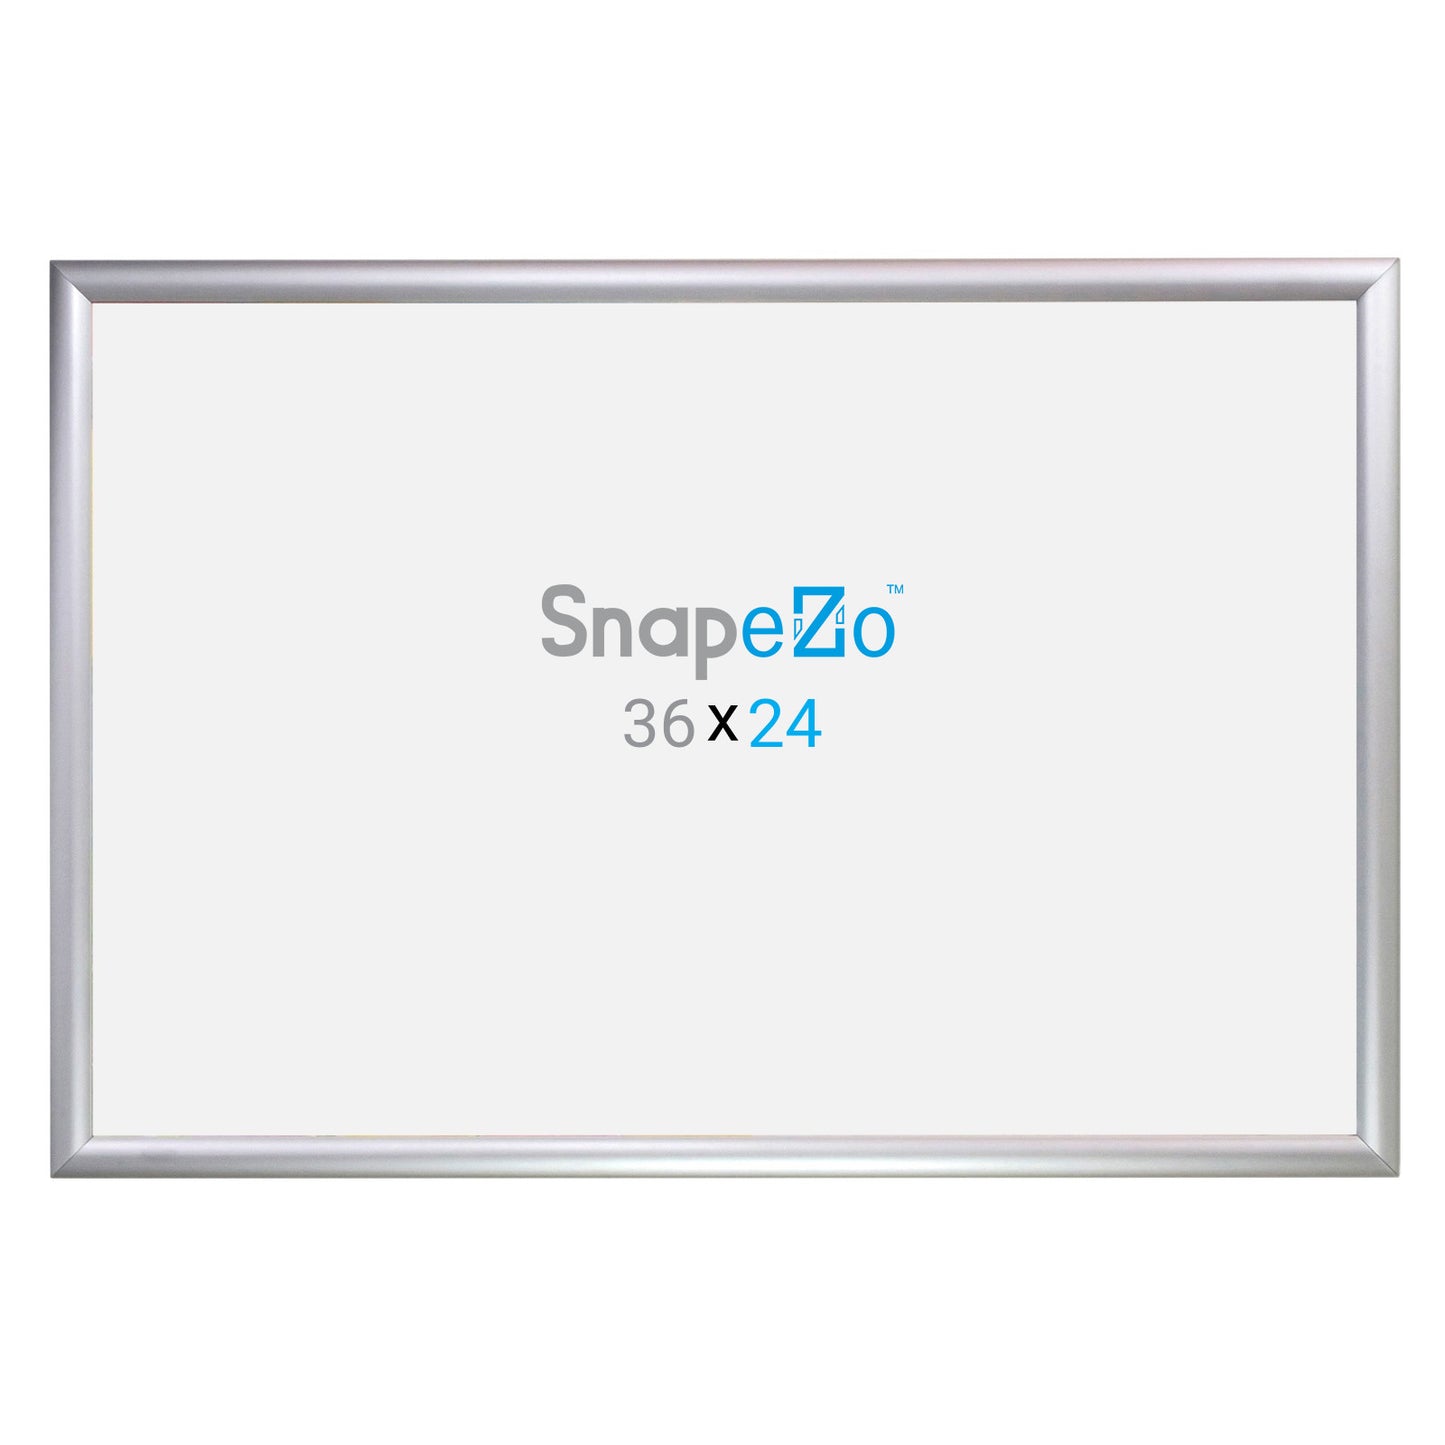 5 Case Pack of Snapezo® of Silver 24x36 Movie Poster Frame - 1.2" Profile